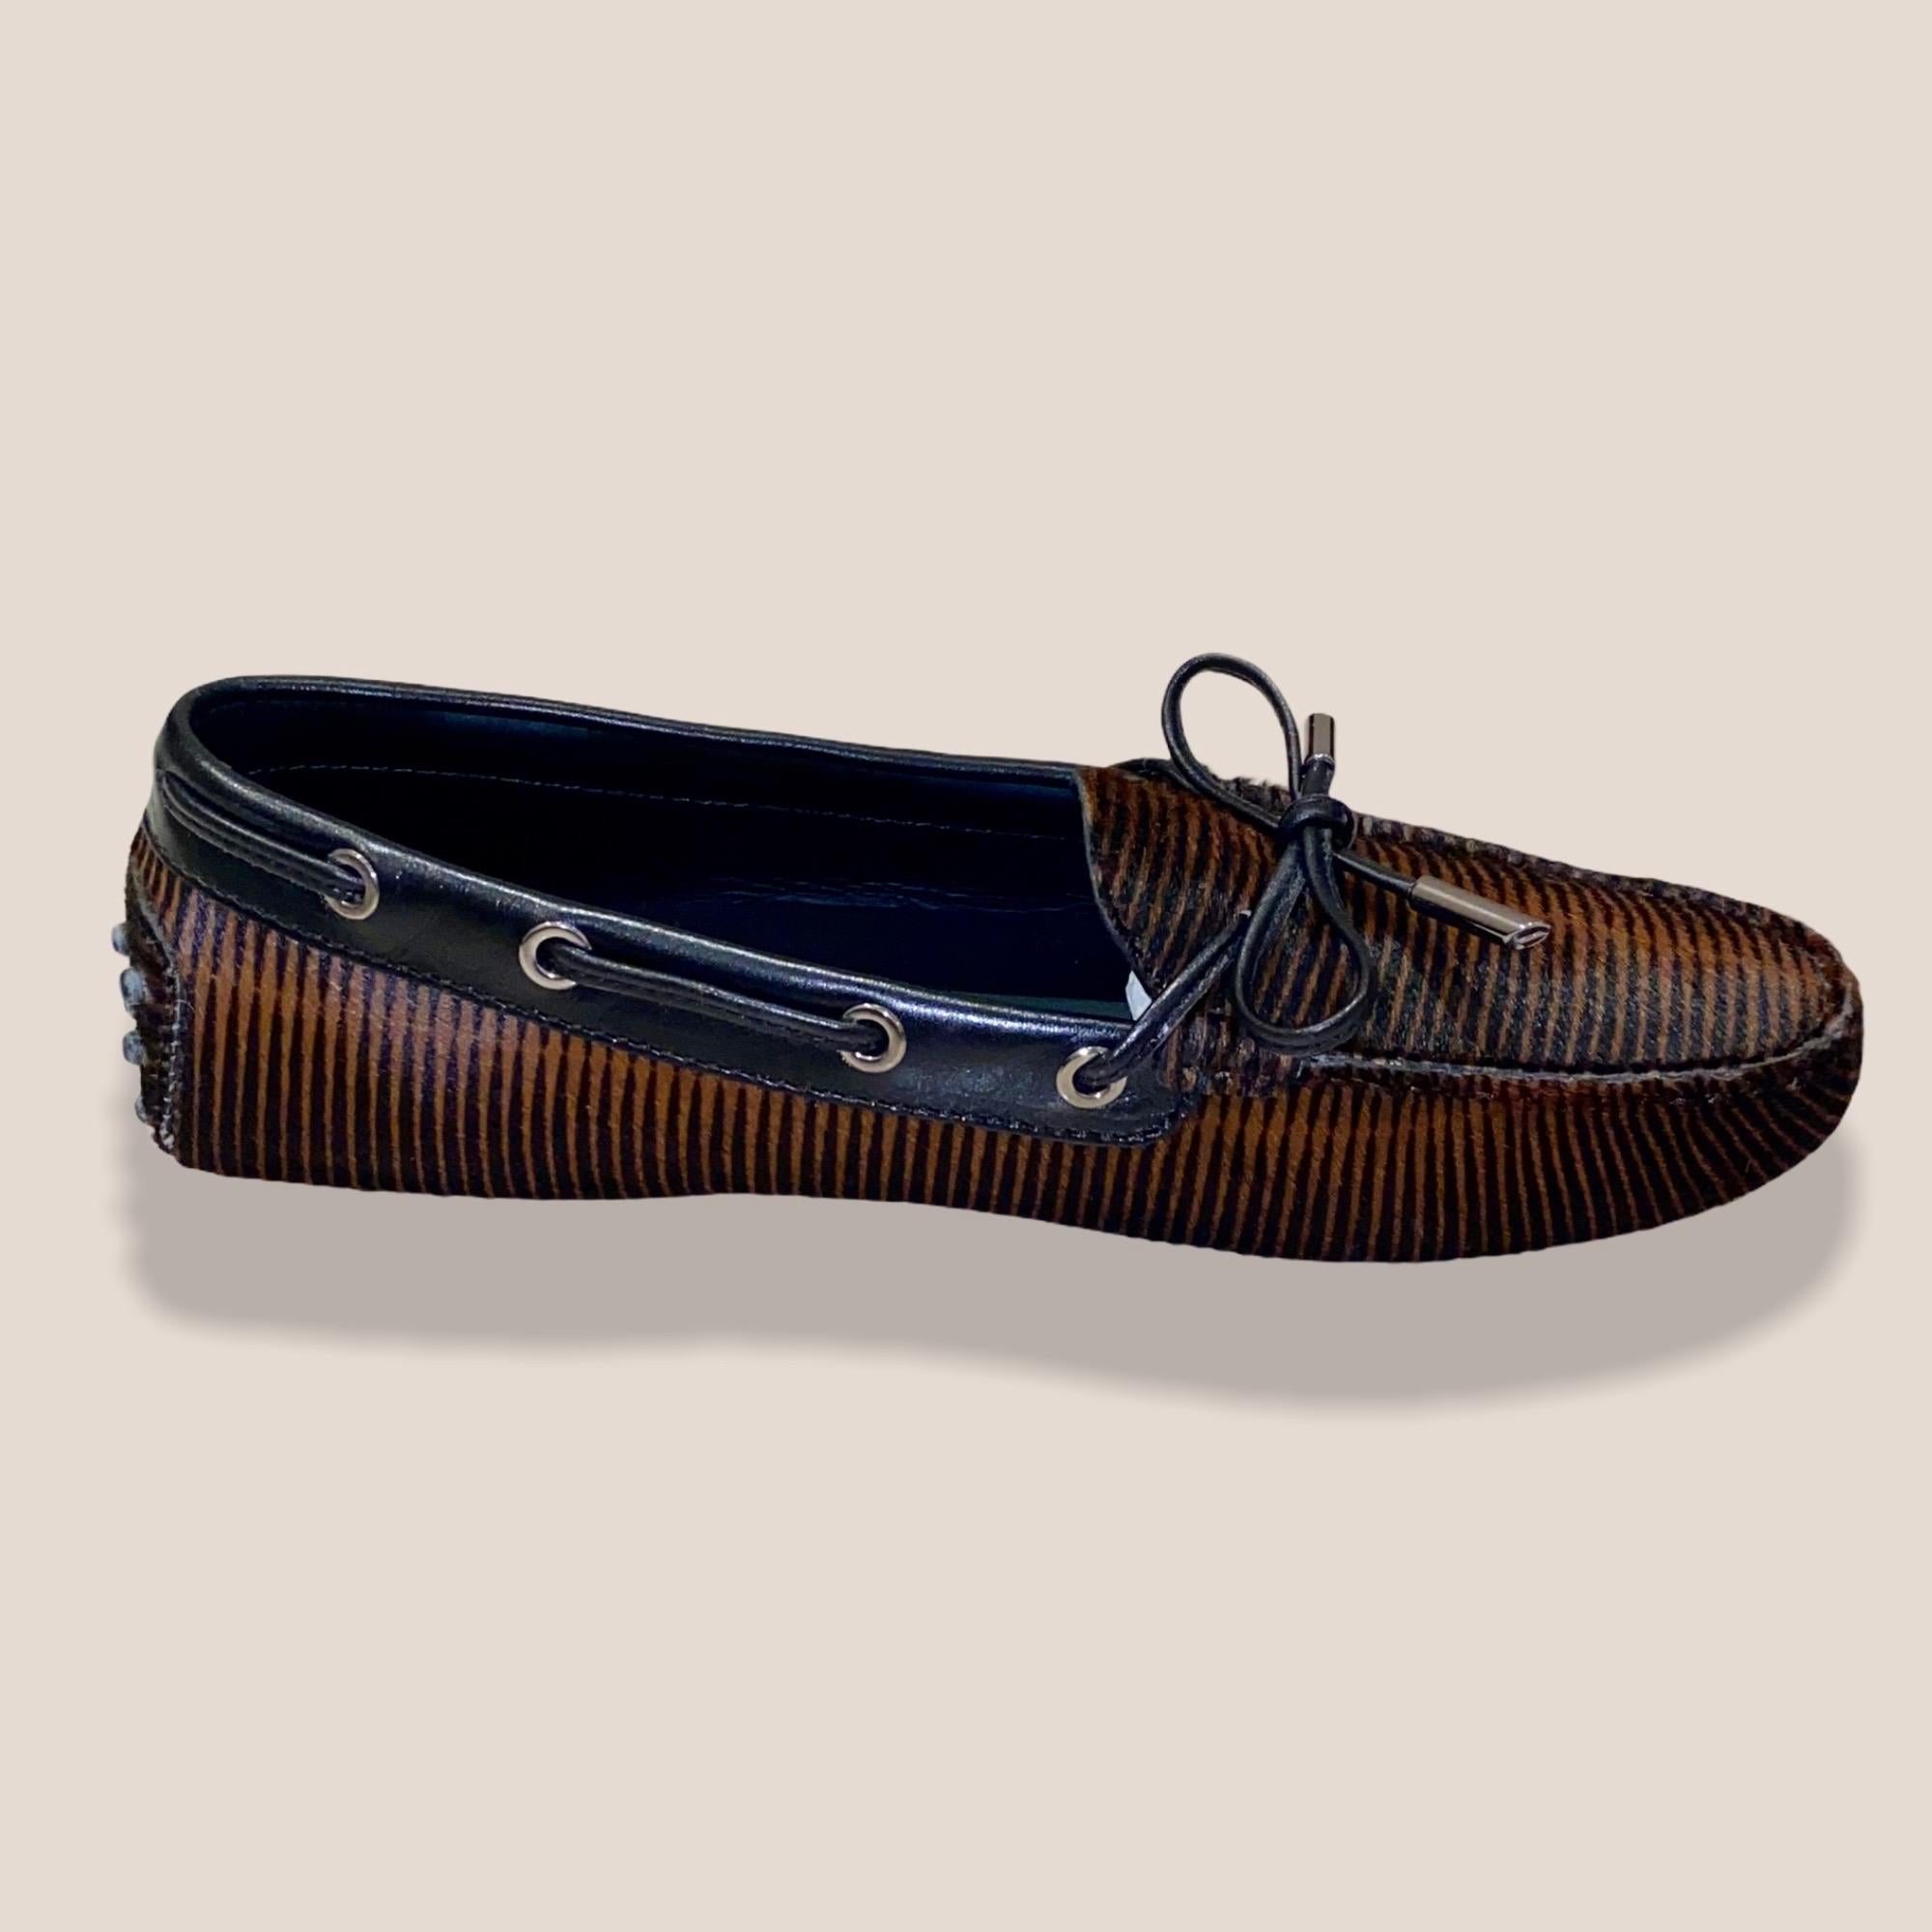 tods driving moc